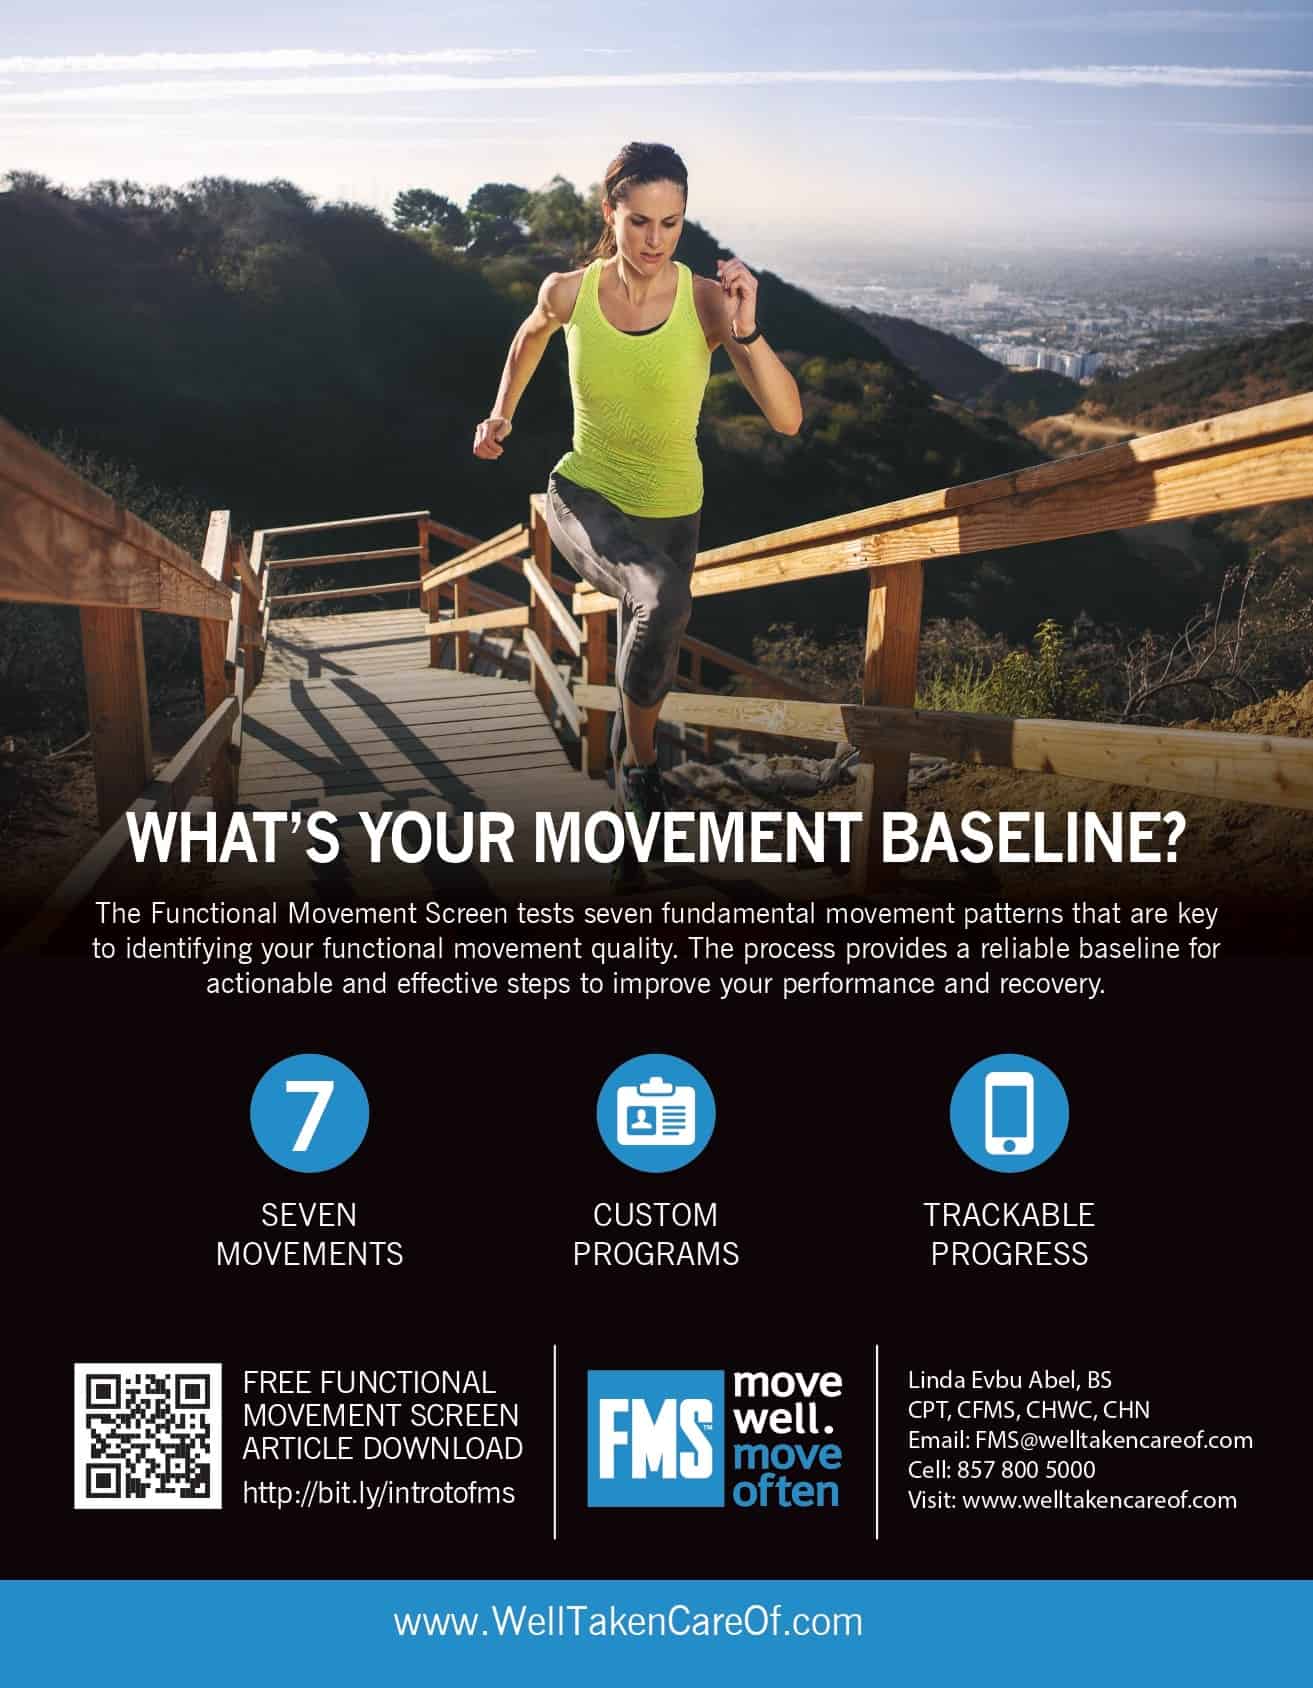 A flyer with information about the movement baseline.